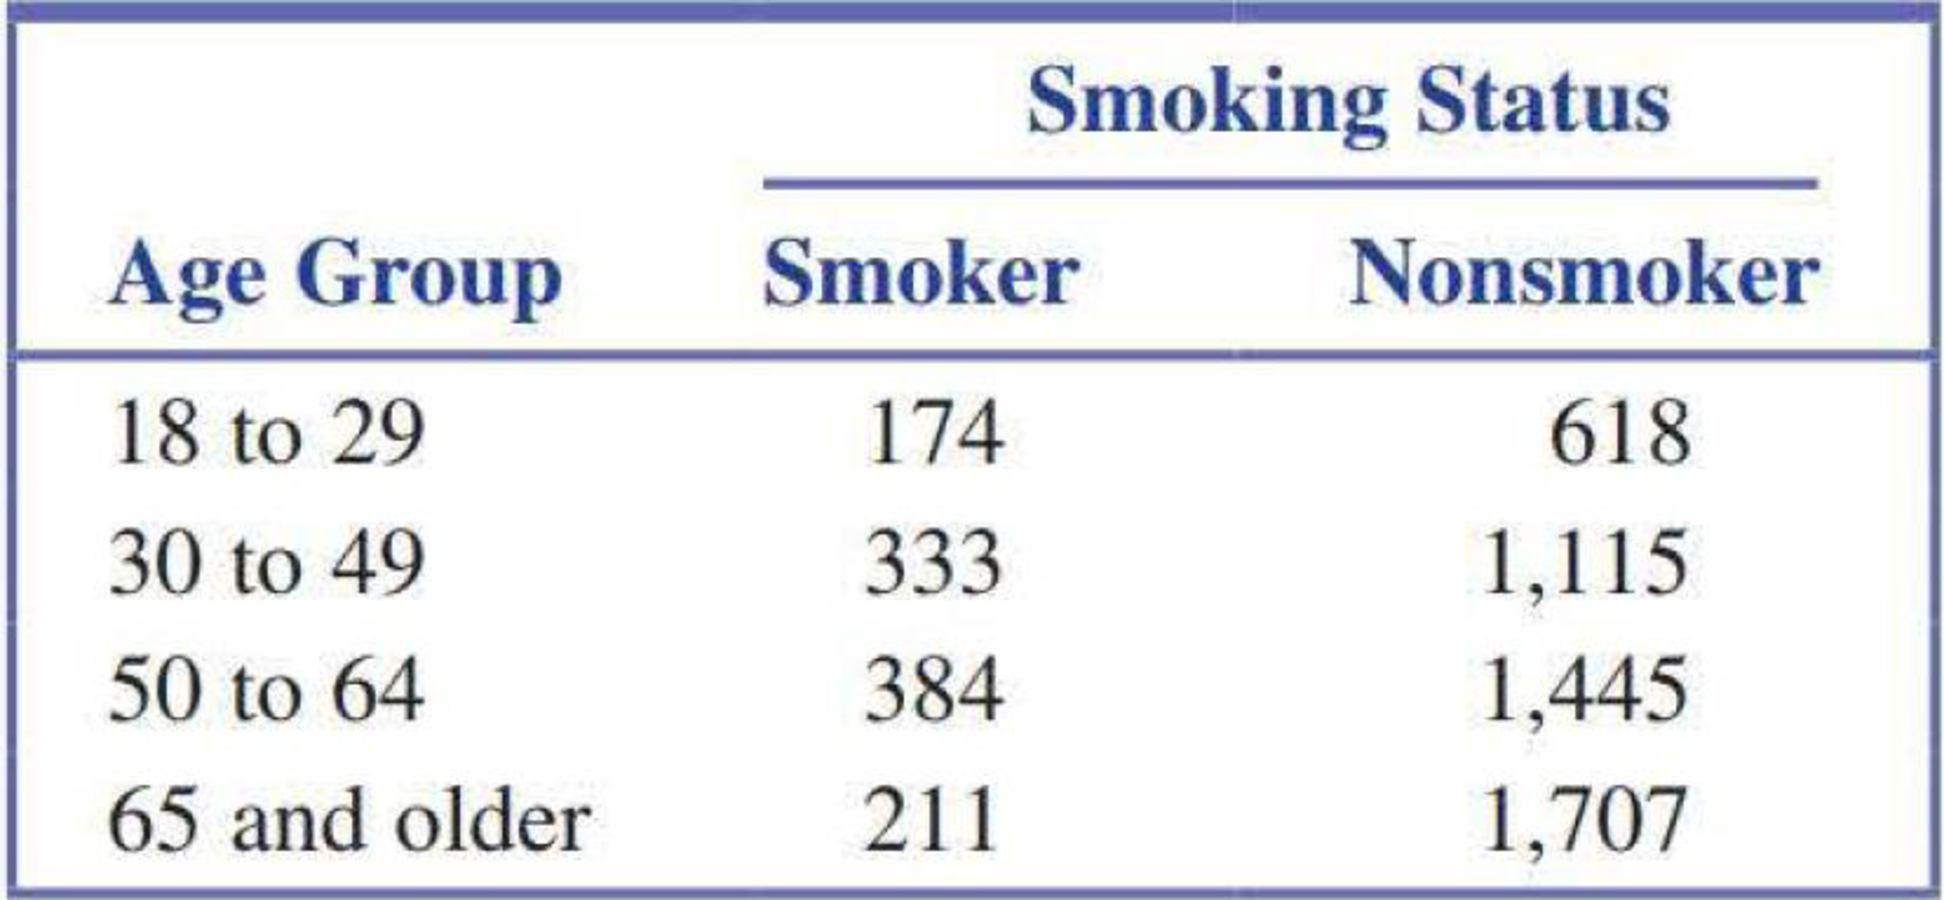 Chapter 6, Problem 106CR, The following table summarizing data on smoking status and age group is consistent with summary 